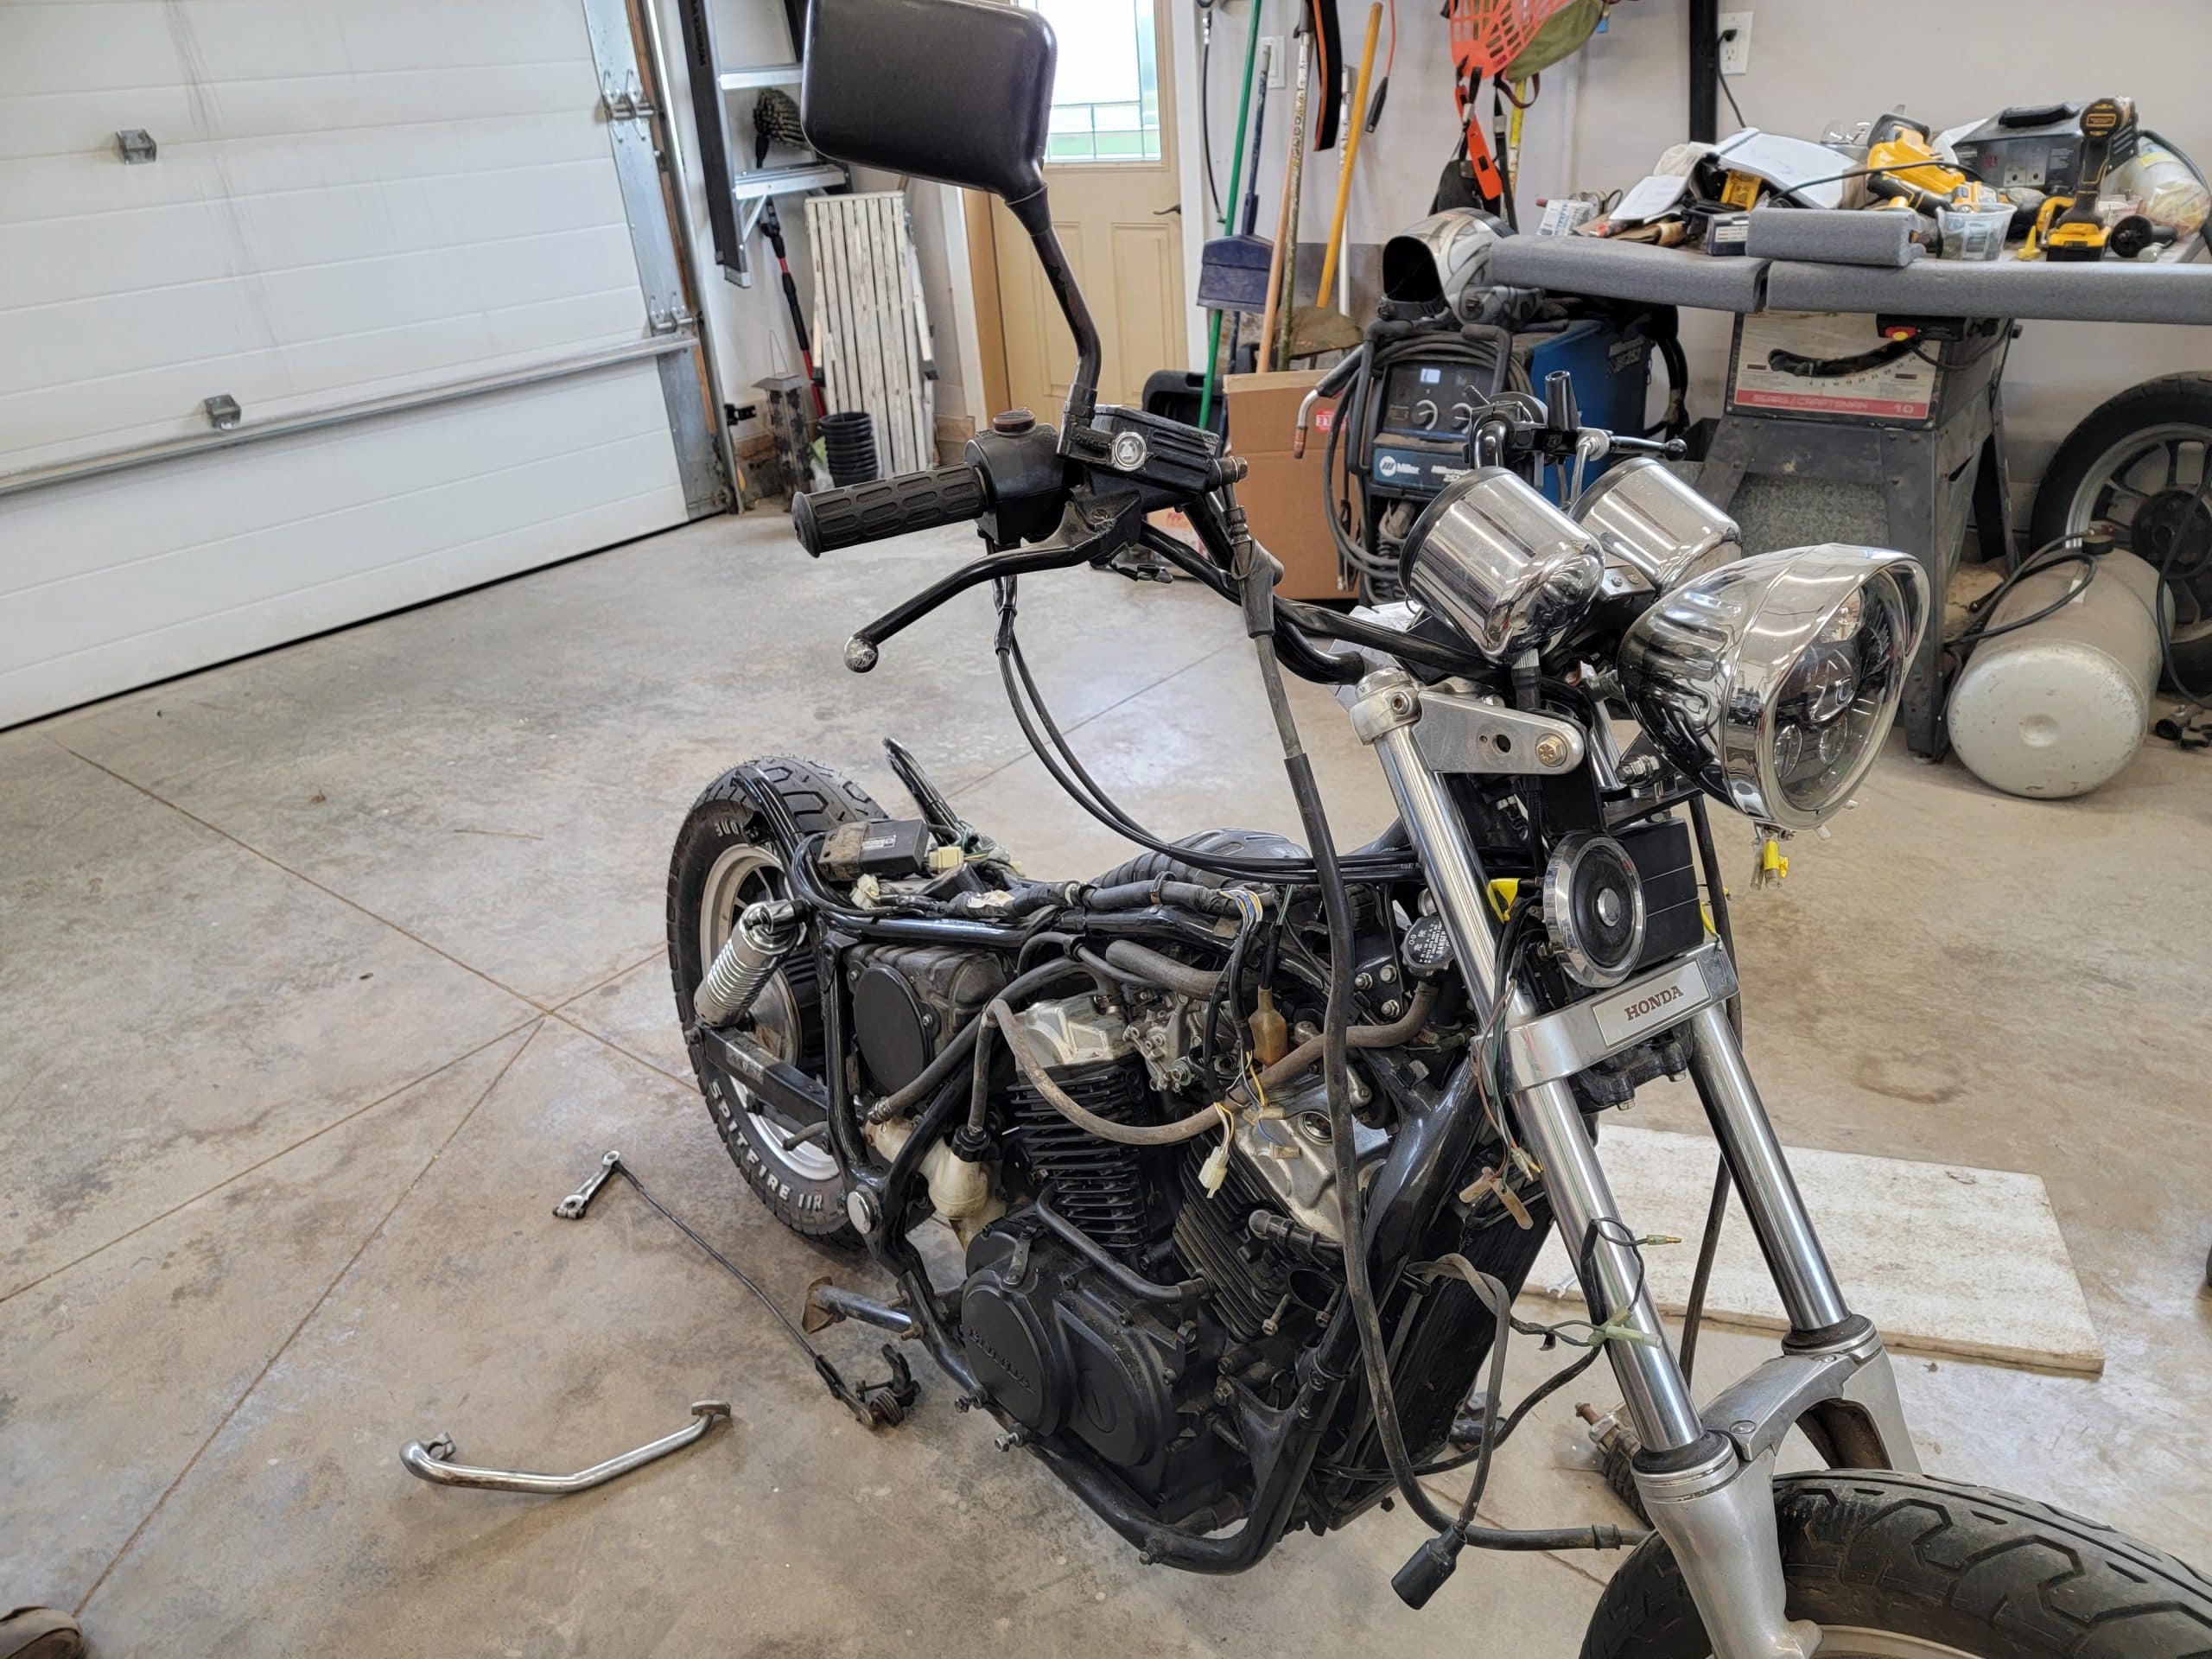 Motorcycle project